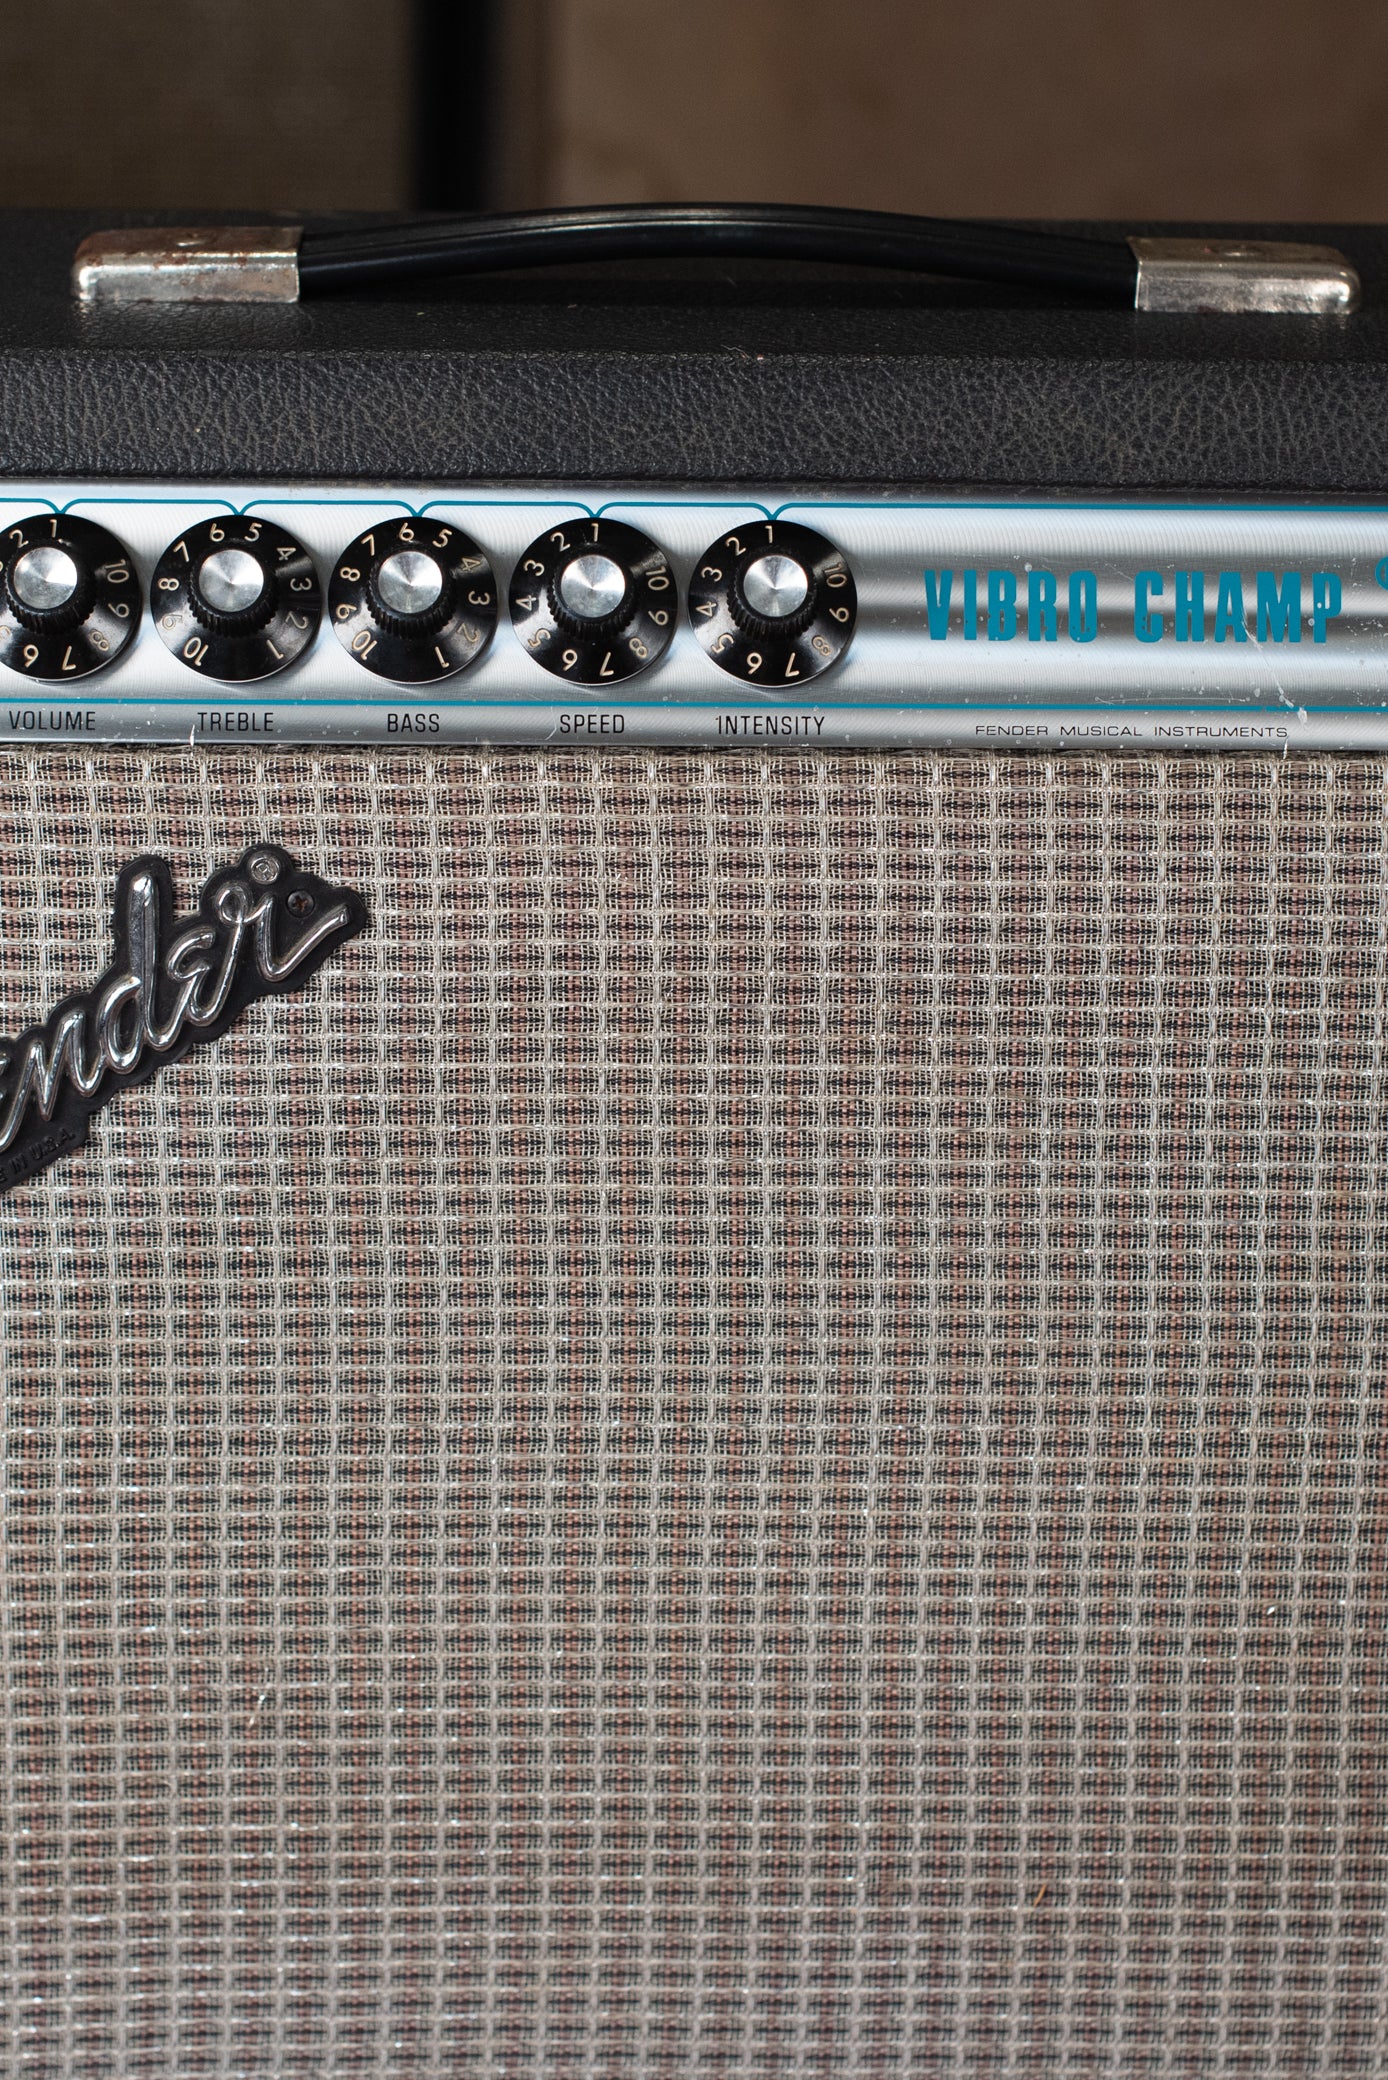 Silverface Fender amp 1970s